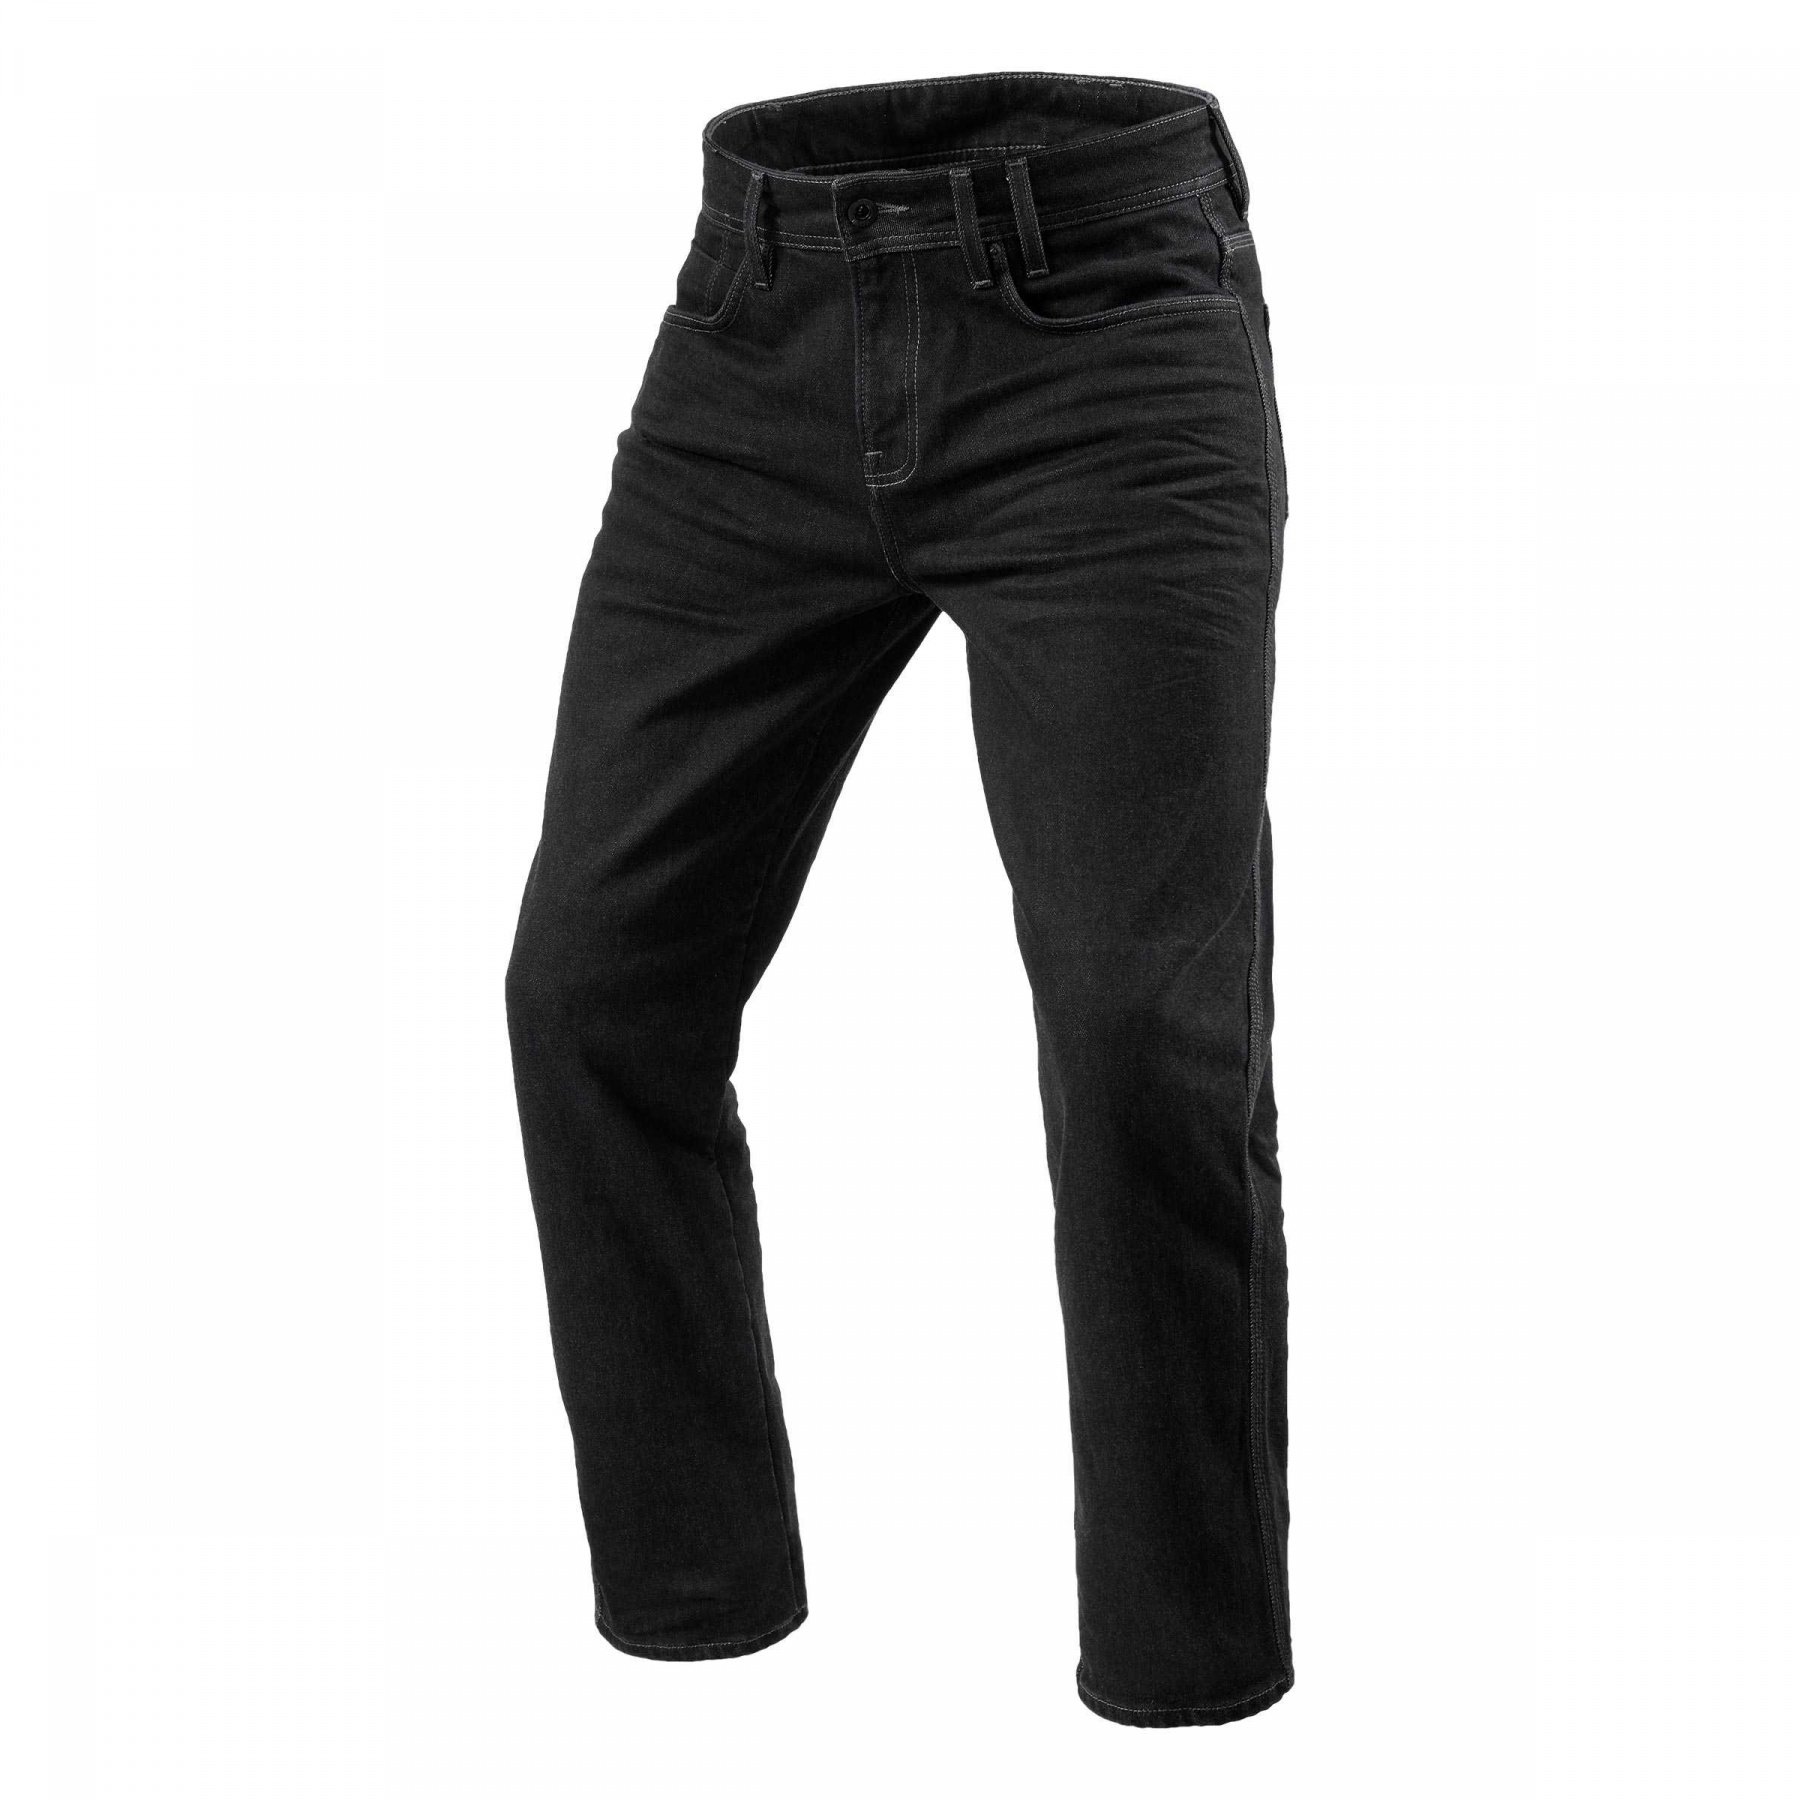 Image of REV'IT! Jeans Lombard 3 RF Dark Blue Used Motorcycle Jeans Size L36/W30 ID 8700001338417